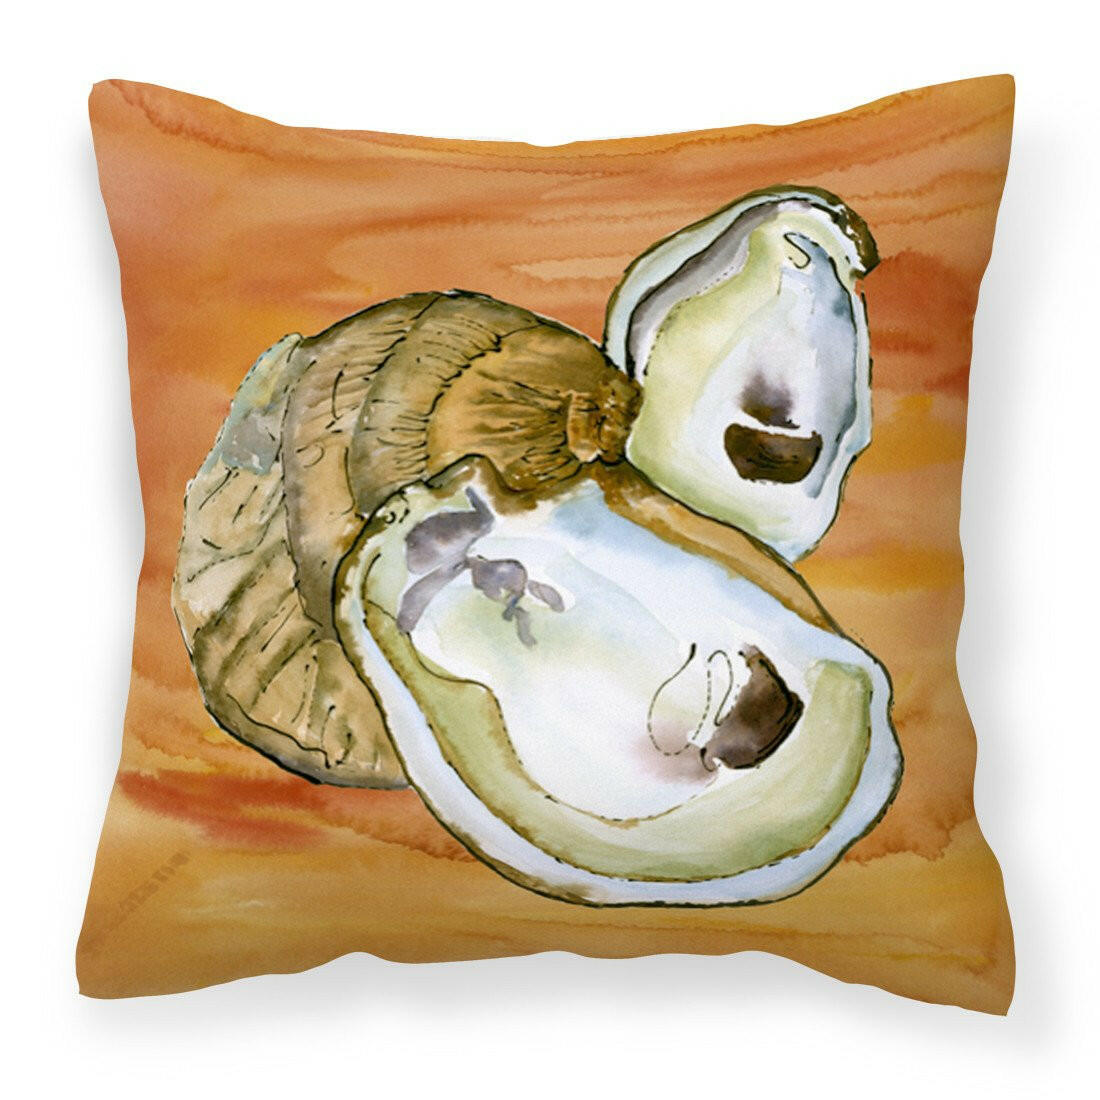 Oyster Fabric Decorative Pillow 8142PW1414 - the-store.com